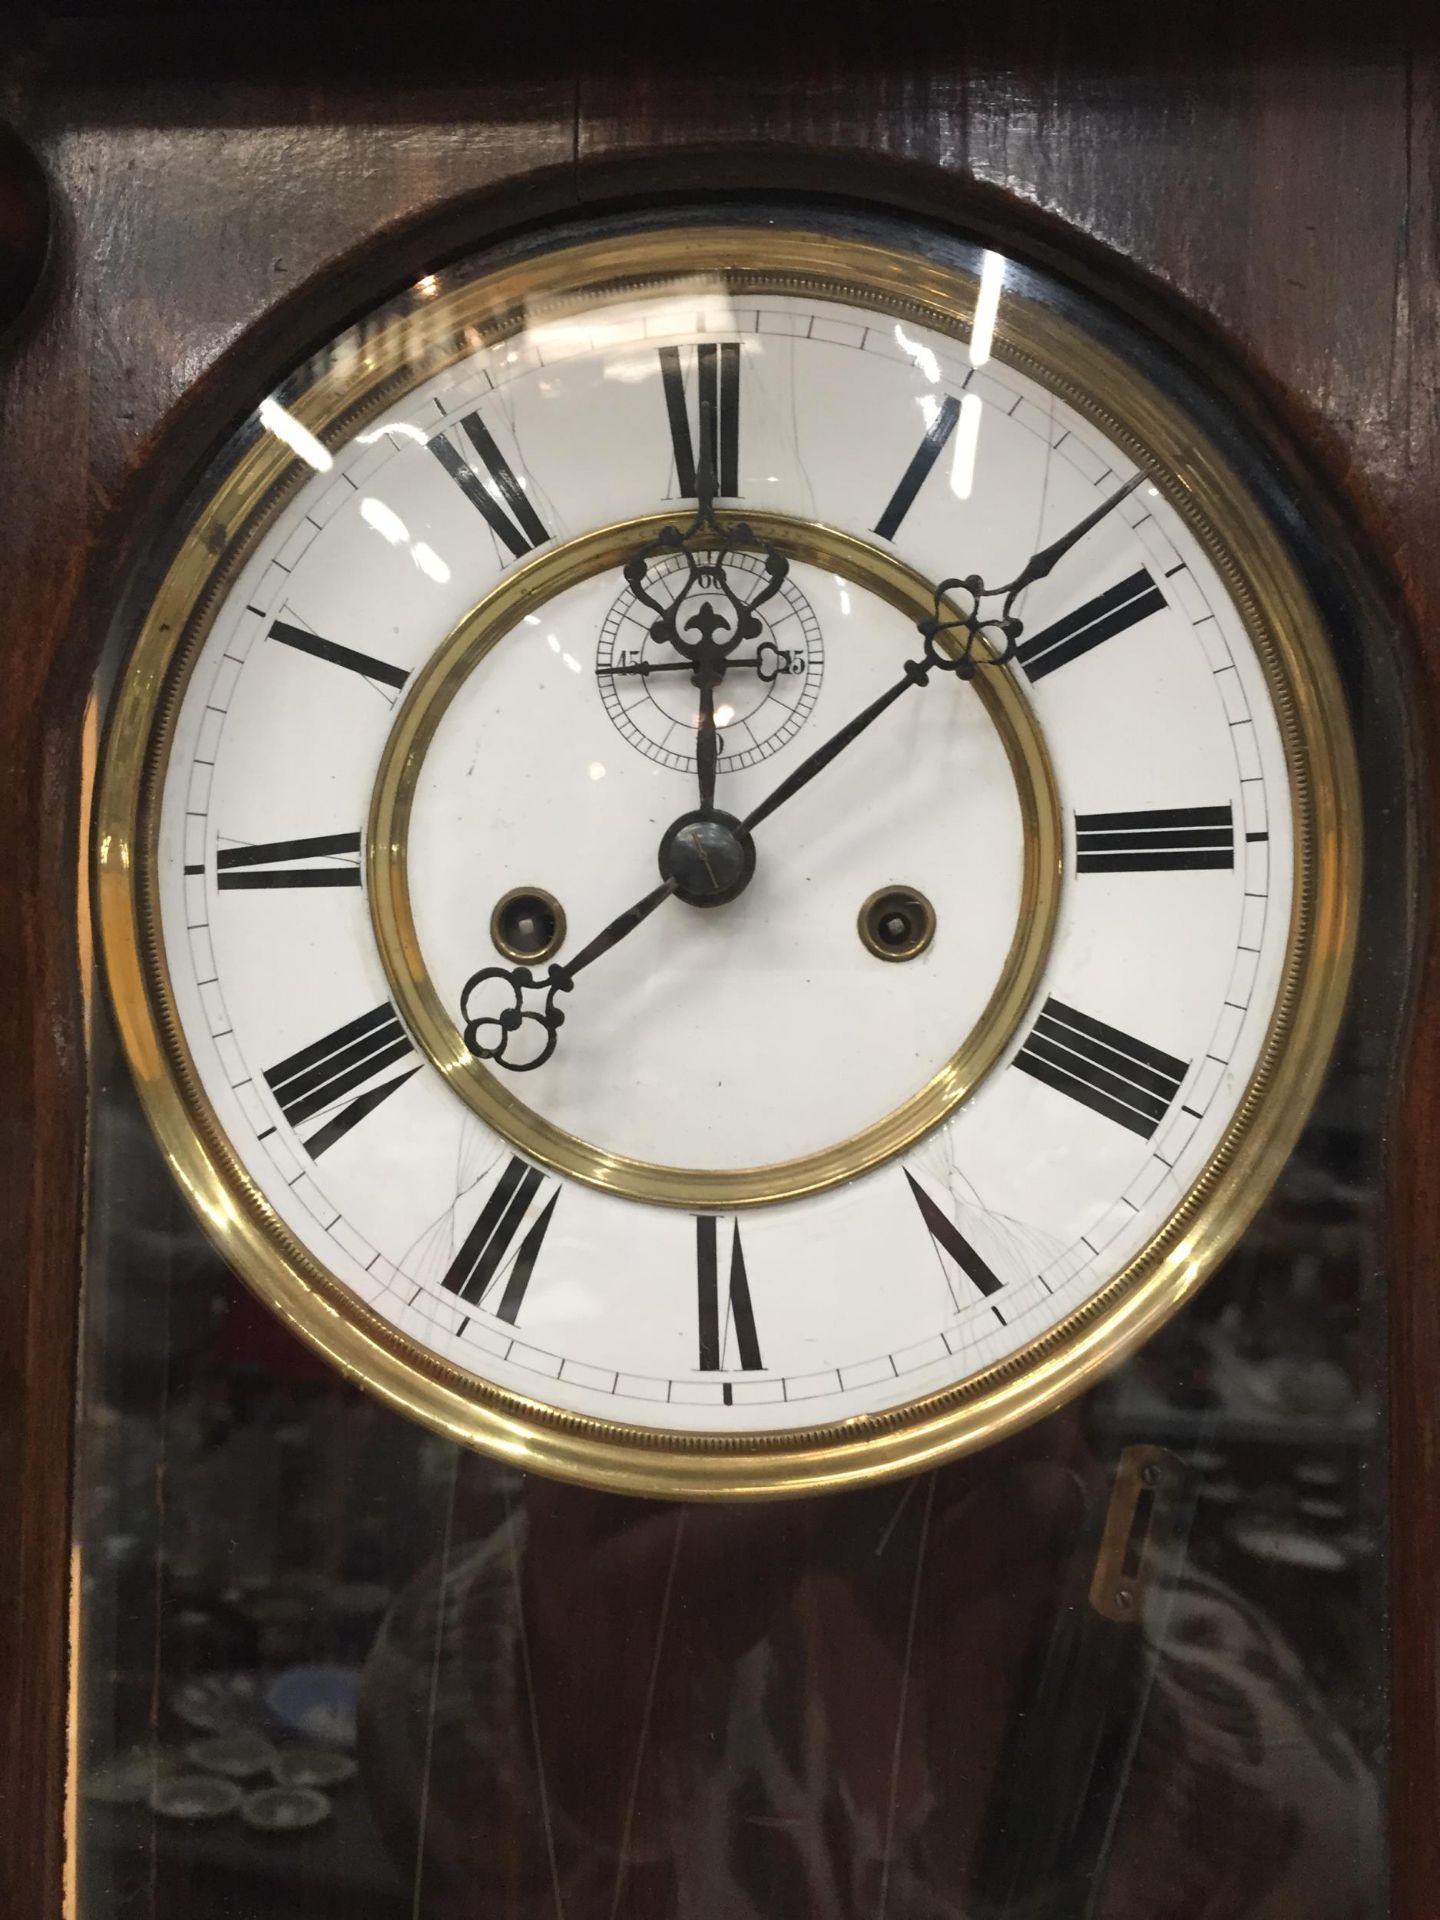 AN EDWARDIAN DOUBLE WEIGHTED CHIMING WALL CLOCK IN MAHOGANY CASE, WITH WEIGHTS - Image 2 of 4